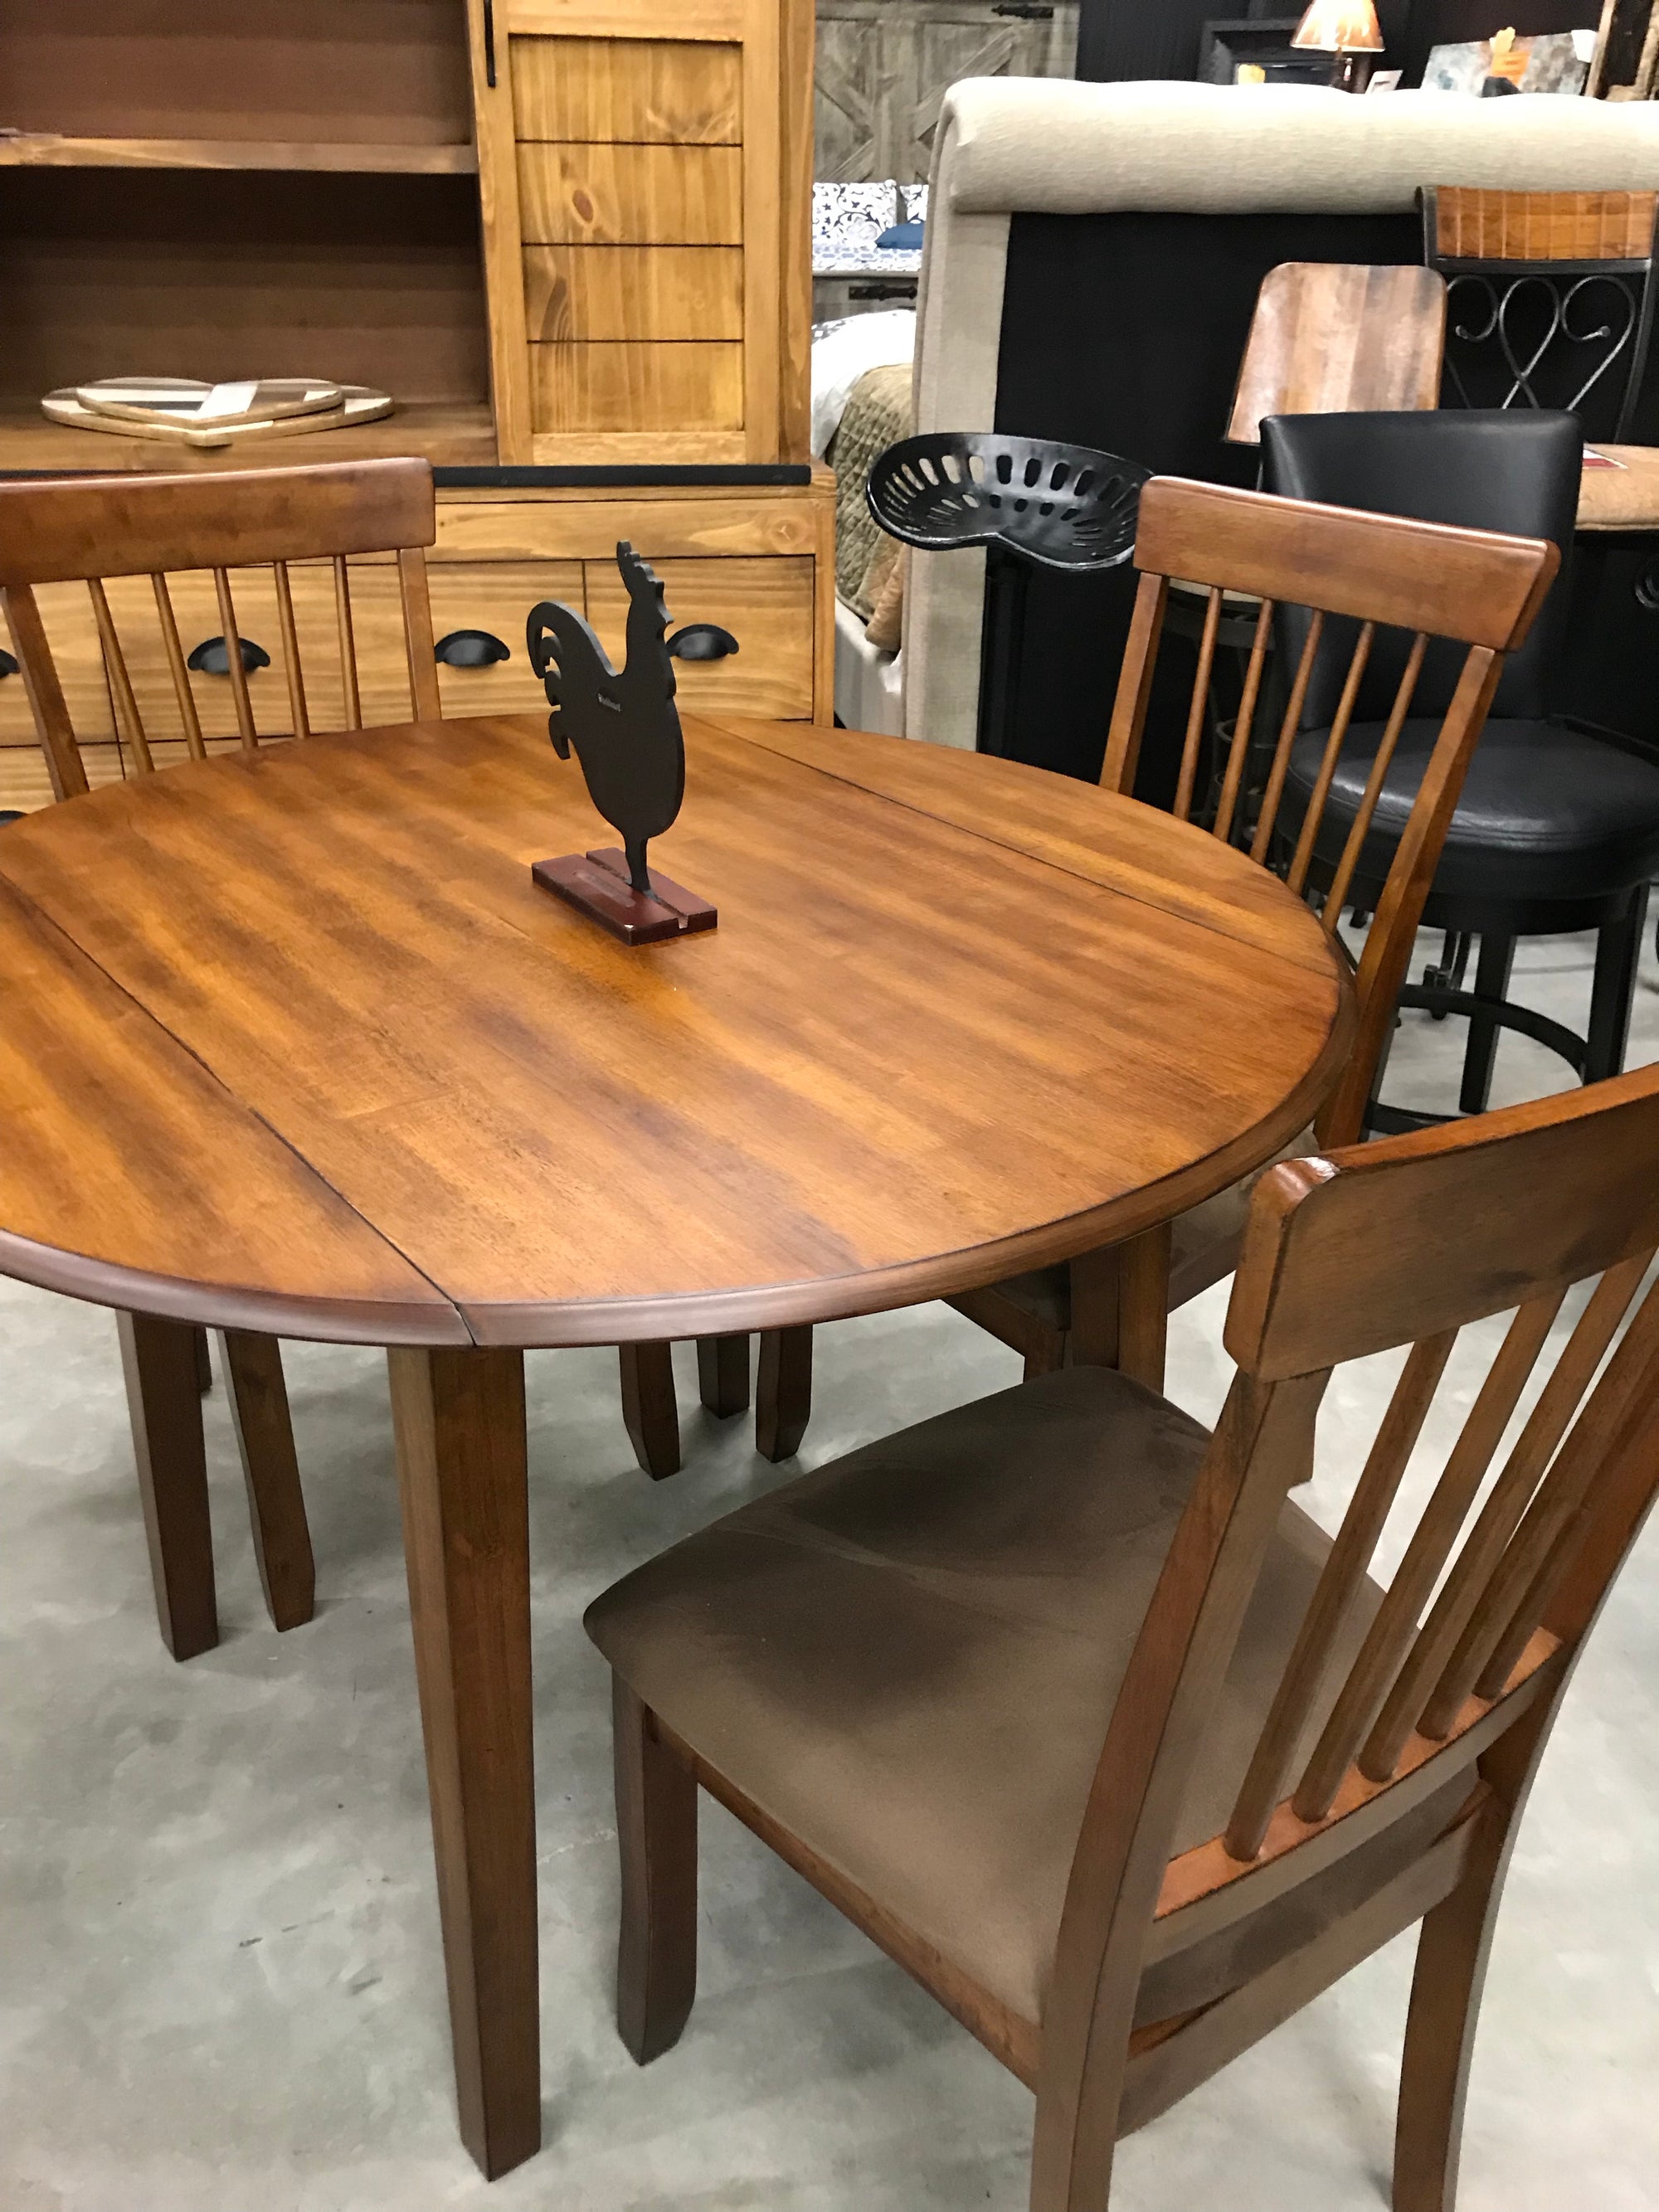 D200 FI-A Hickory Stain Drop Leaf Table with 2 chairs